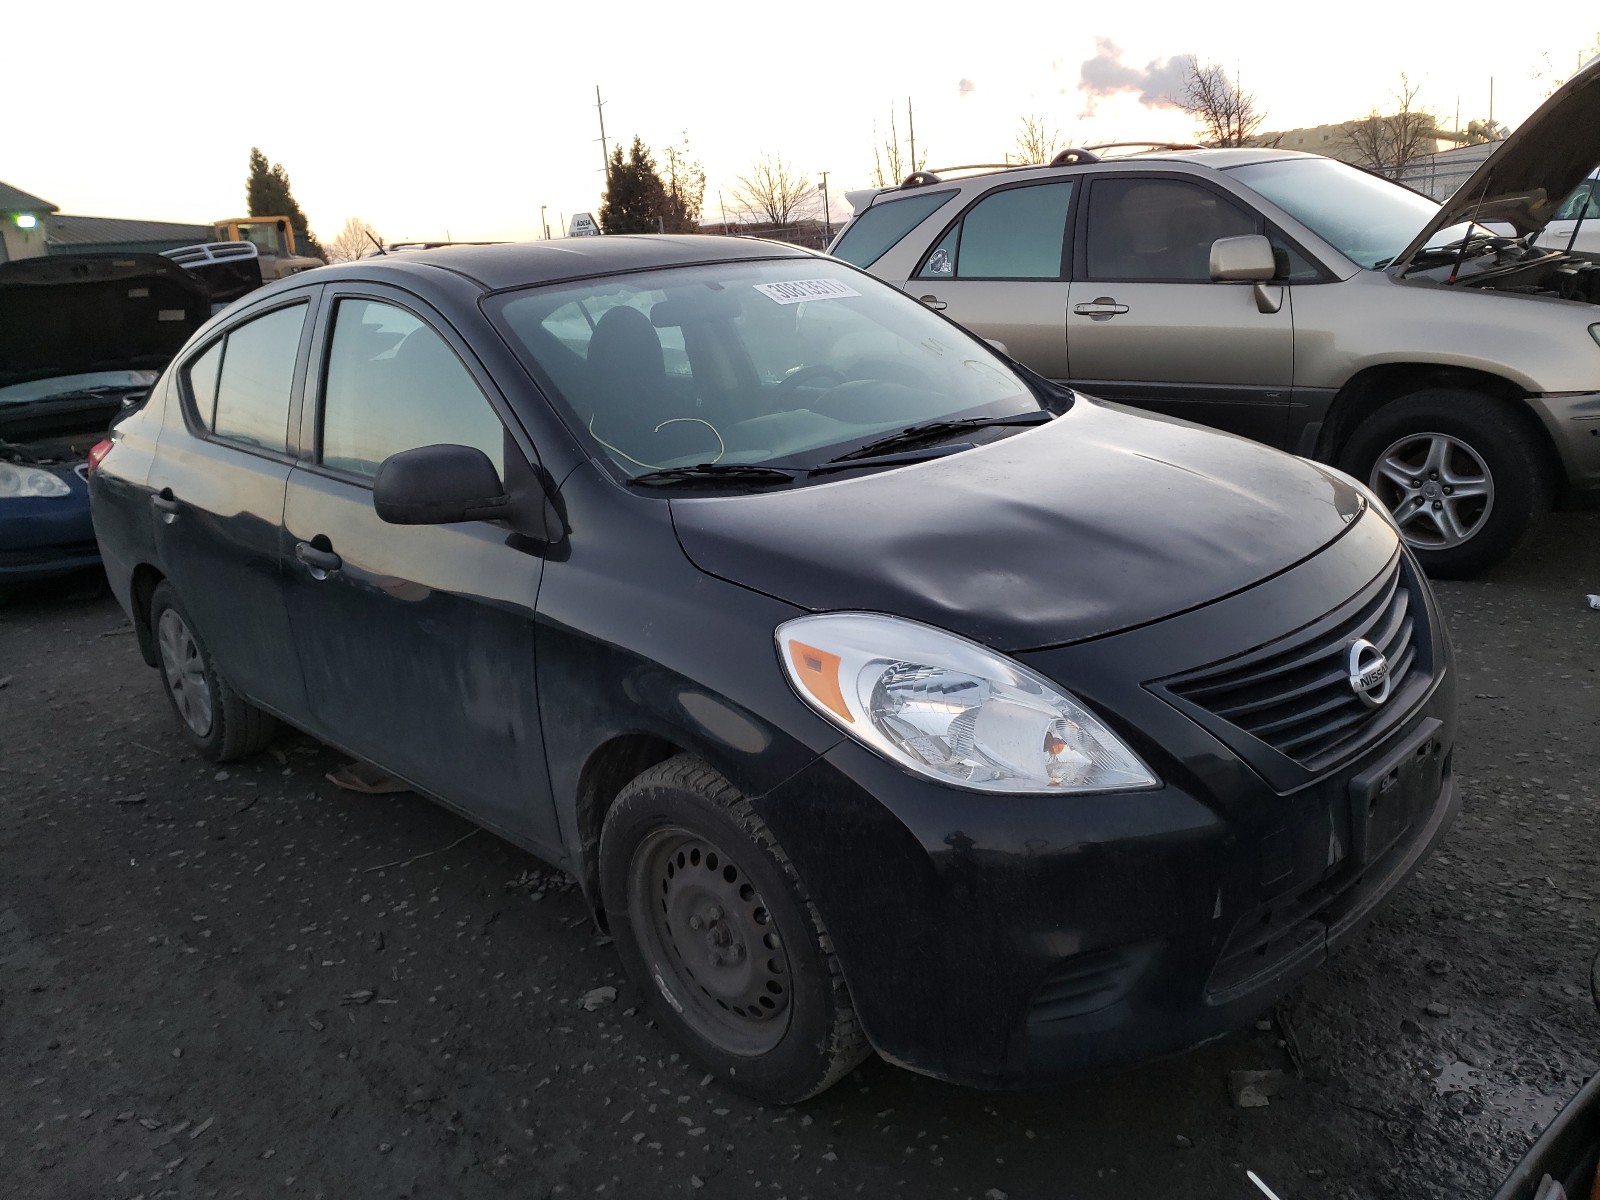 vin: 3N1CN7AP1DL844966 3N1CN7AP1DL844966 2013 nissan versa s 1600 for Sale in US OR